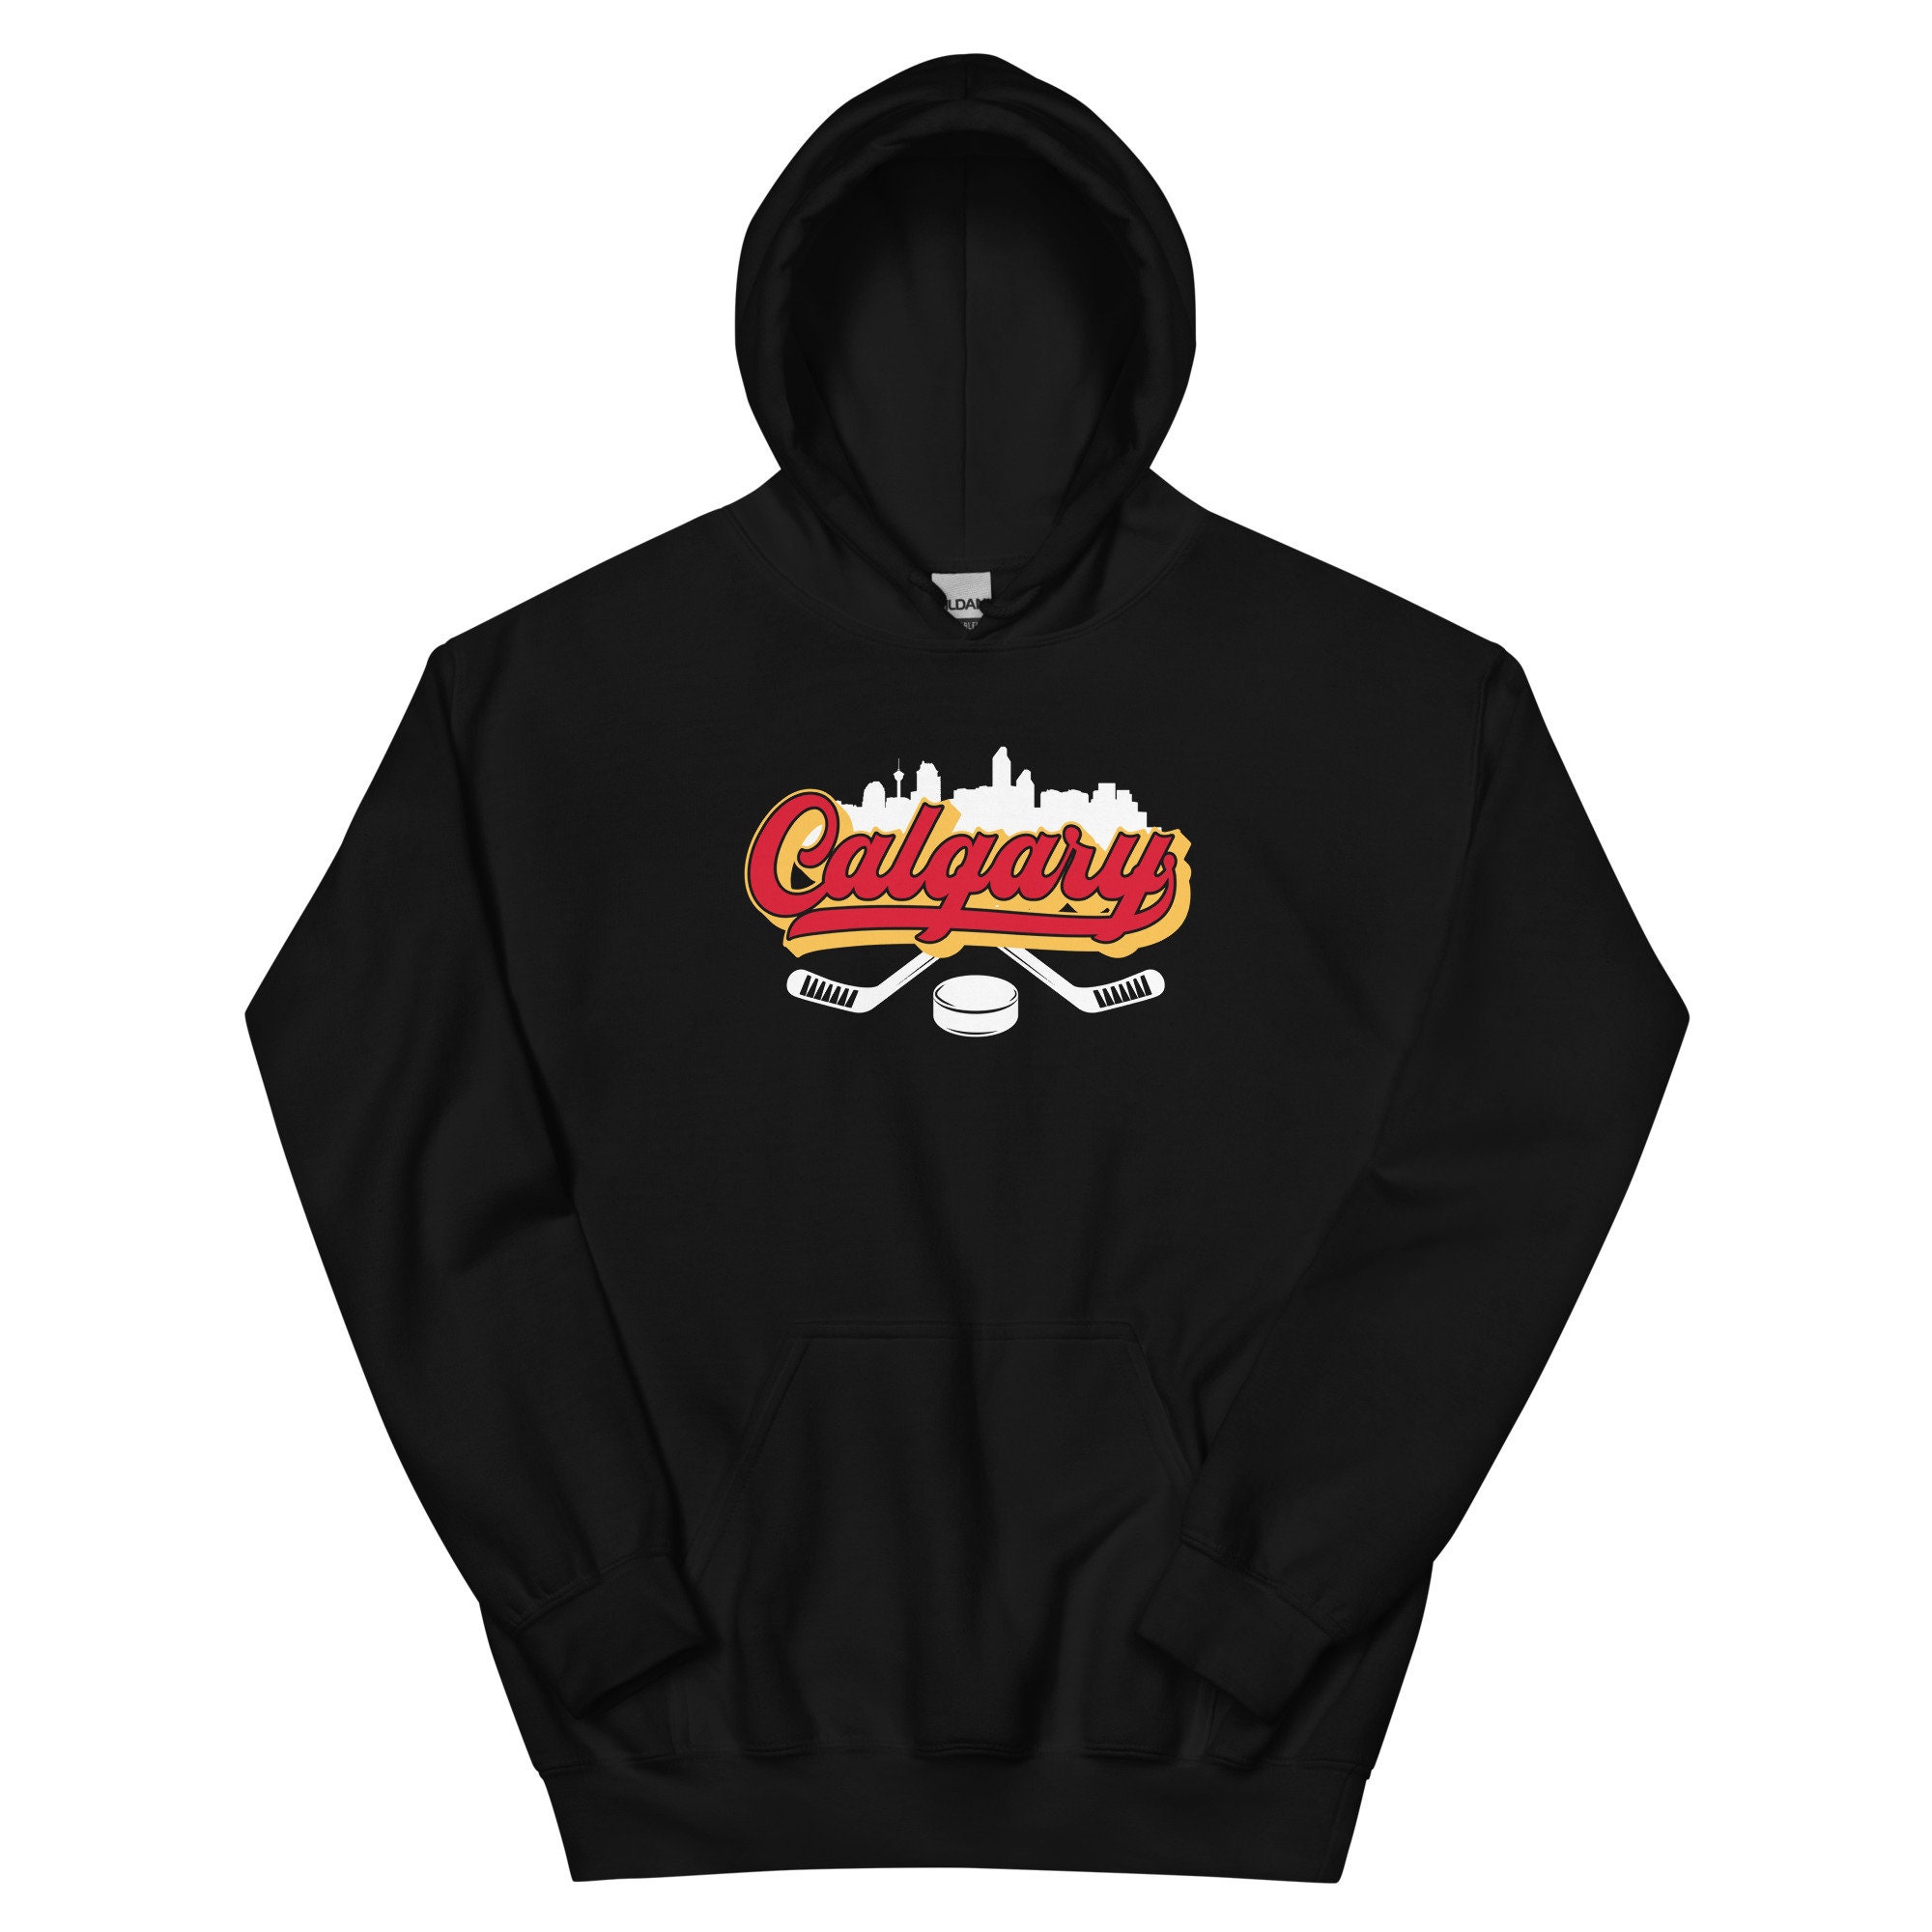 Custom ATLANTA FLAMES CALGARY FLAMES 70s Vintage Away Sweatshirt Hoodie 3D  - Bring Your Ideas, Thoughts And Imaginations Into Reality Today